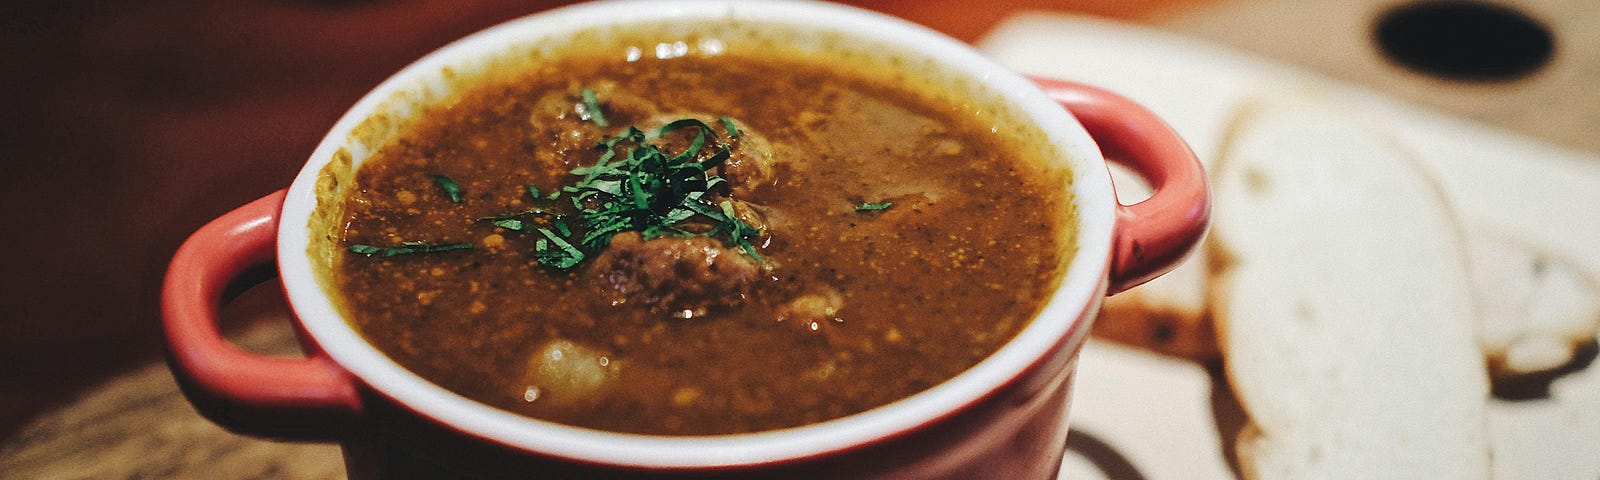 A large and rustic-looking bowl of soup